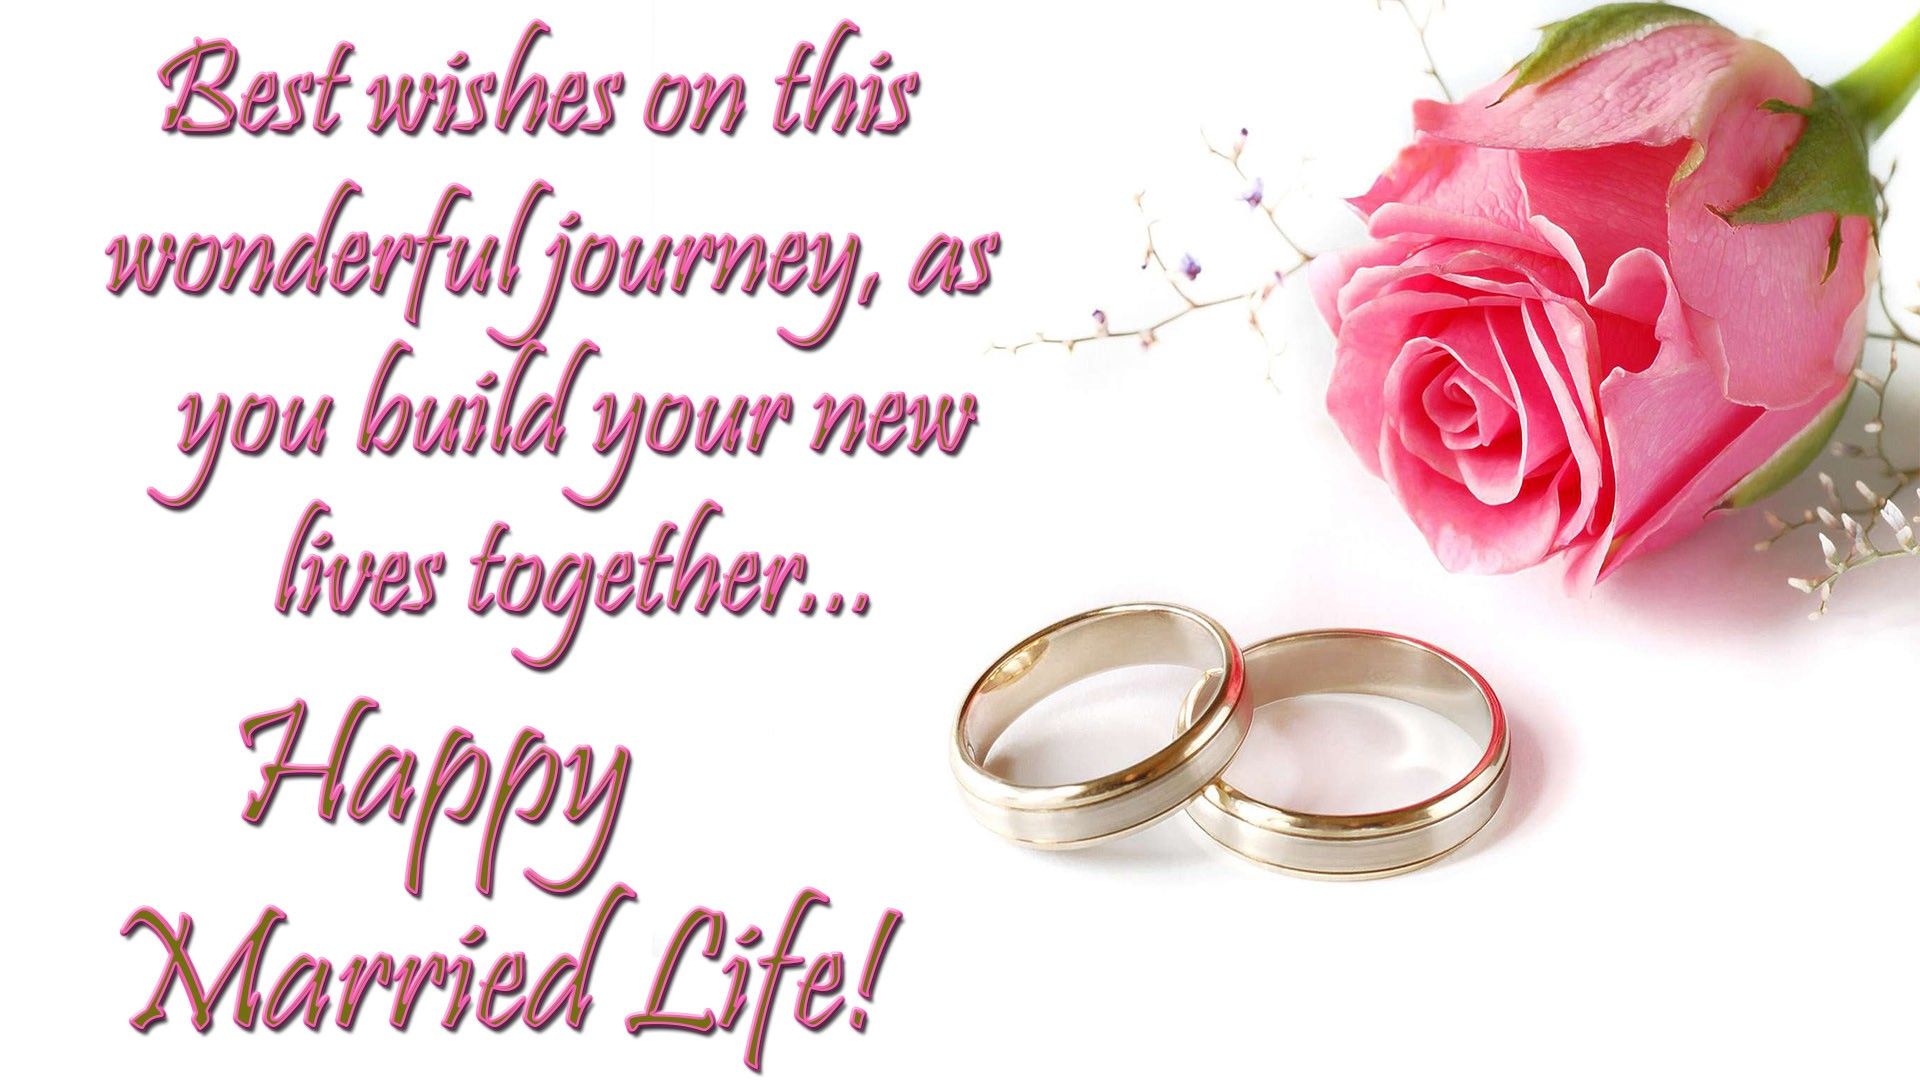 good wishes. Happy married life, Marriage wishes image, Happy marriage life wishes